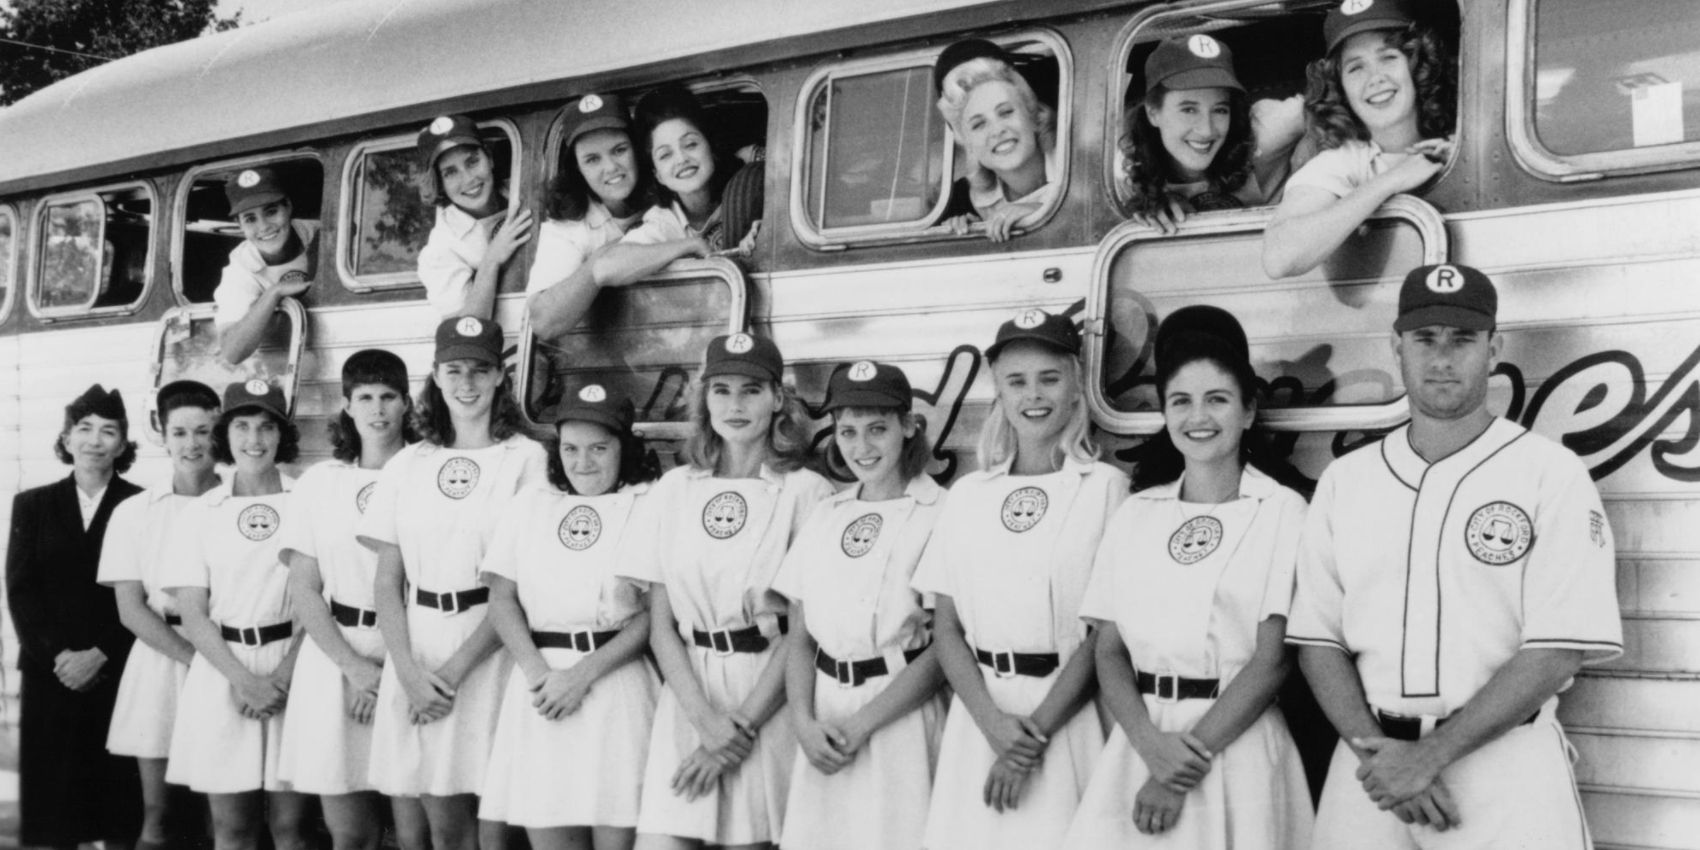 The Rockford Peaches posing in front of a bus in A League Of Their Own.